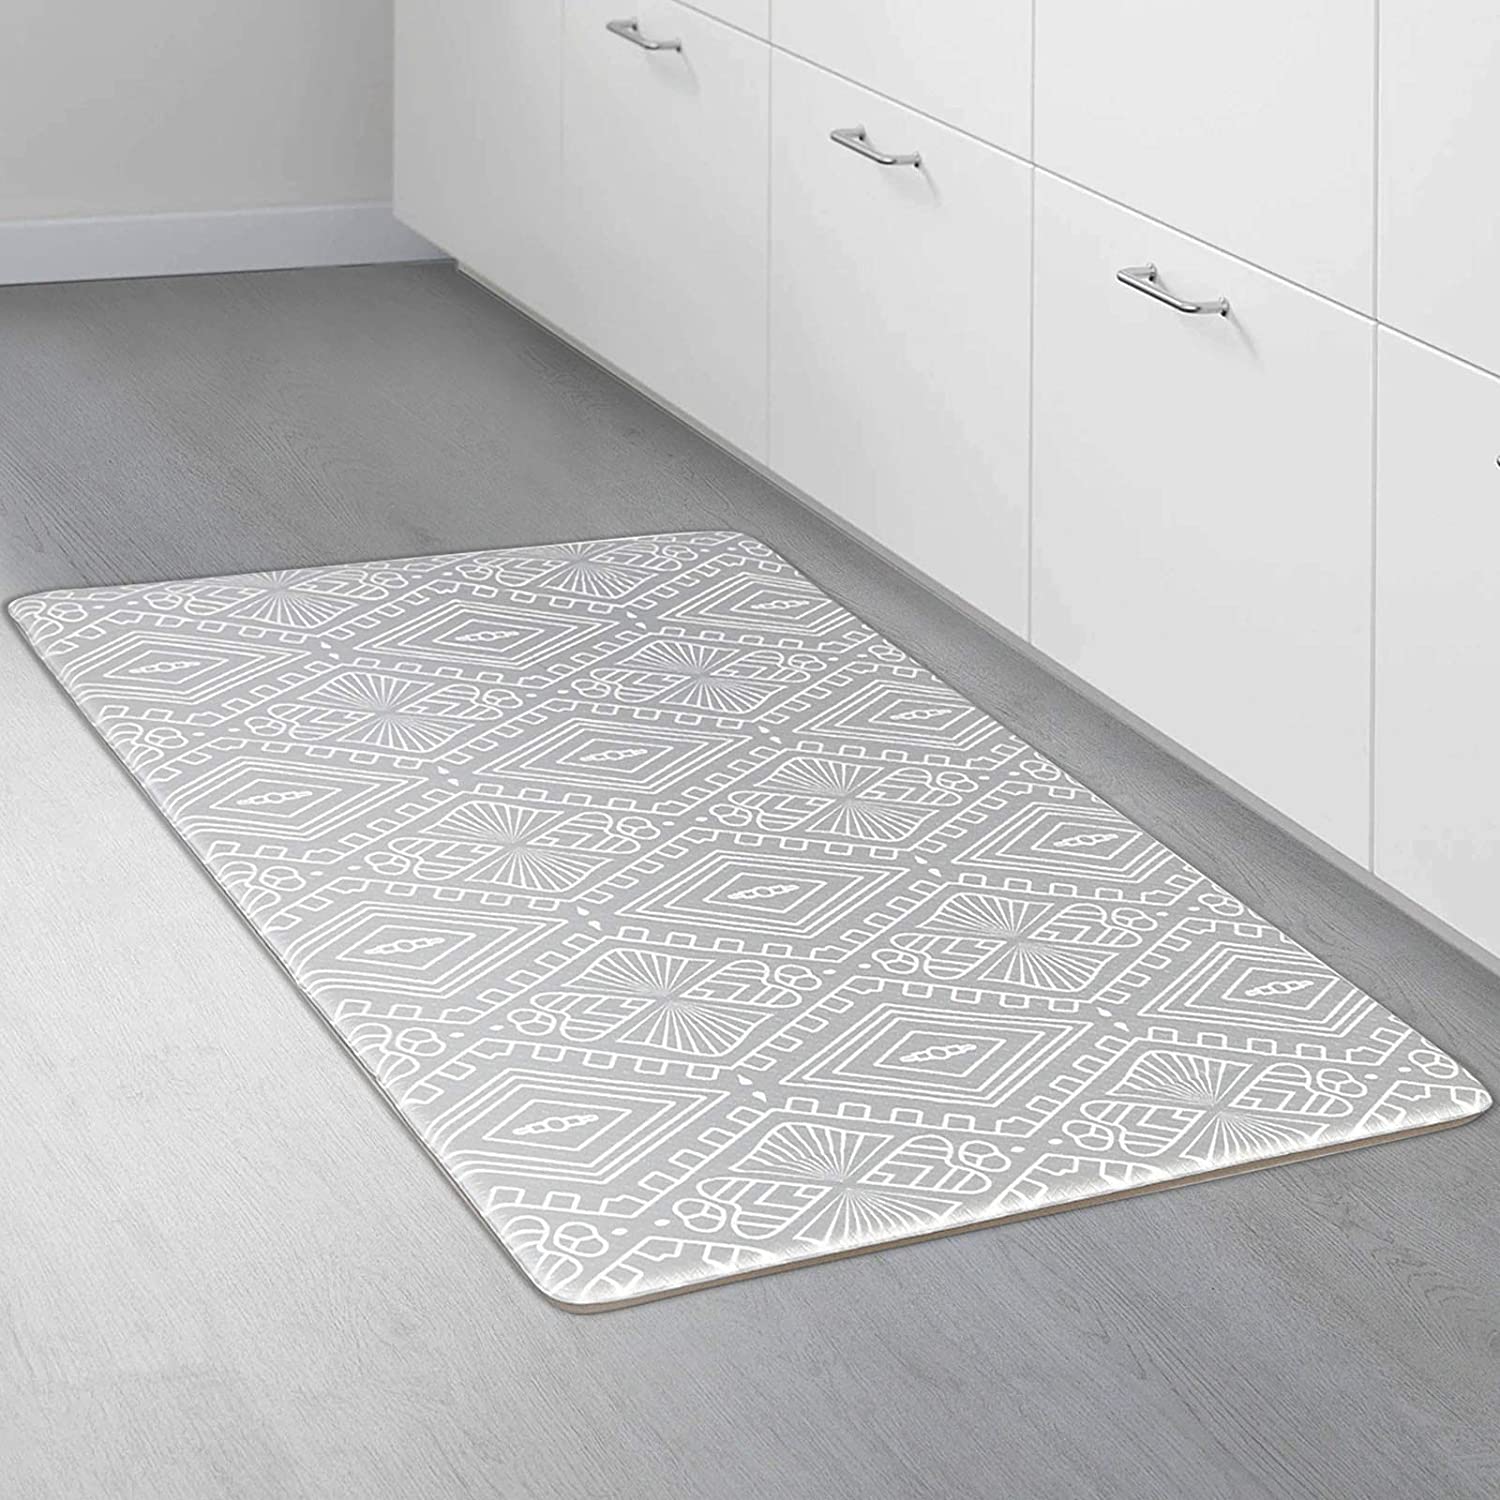 Anti Fatigue Kitchen Mat Diamond Weave Non-Skid Faux Leather Waterproof Rugs  New